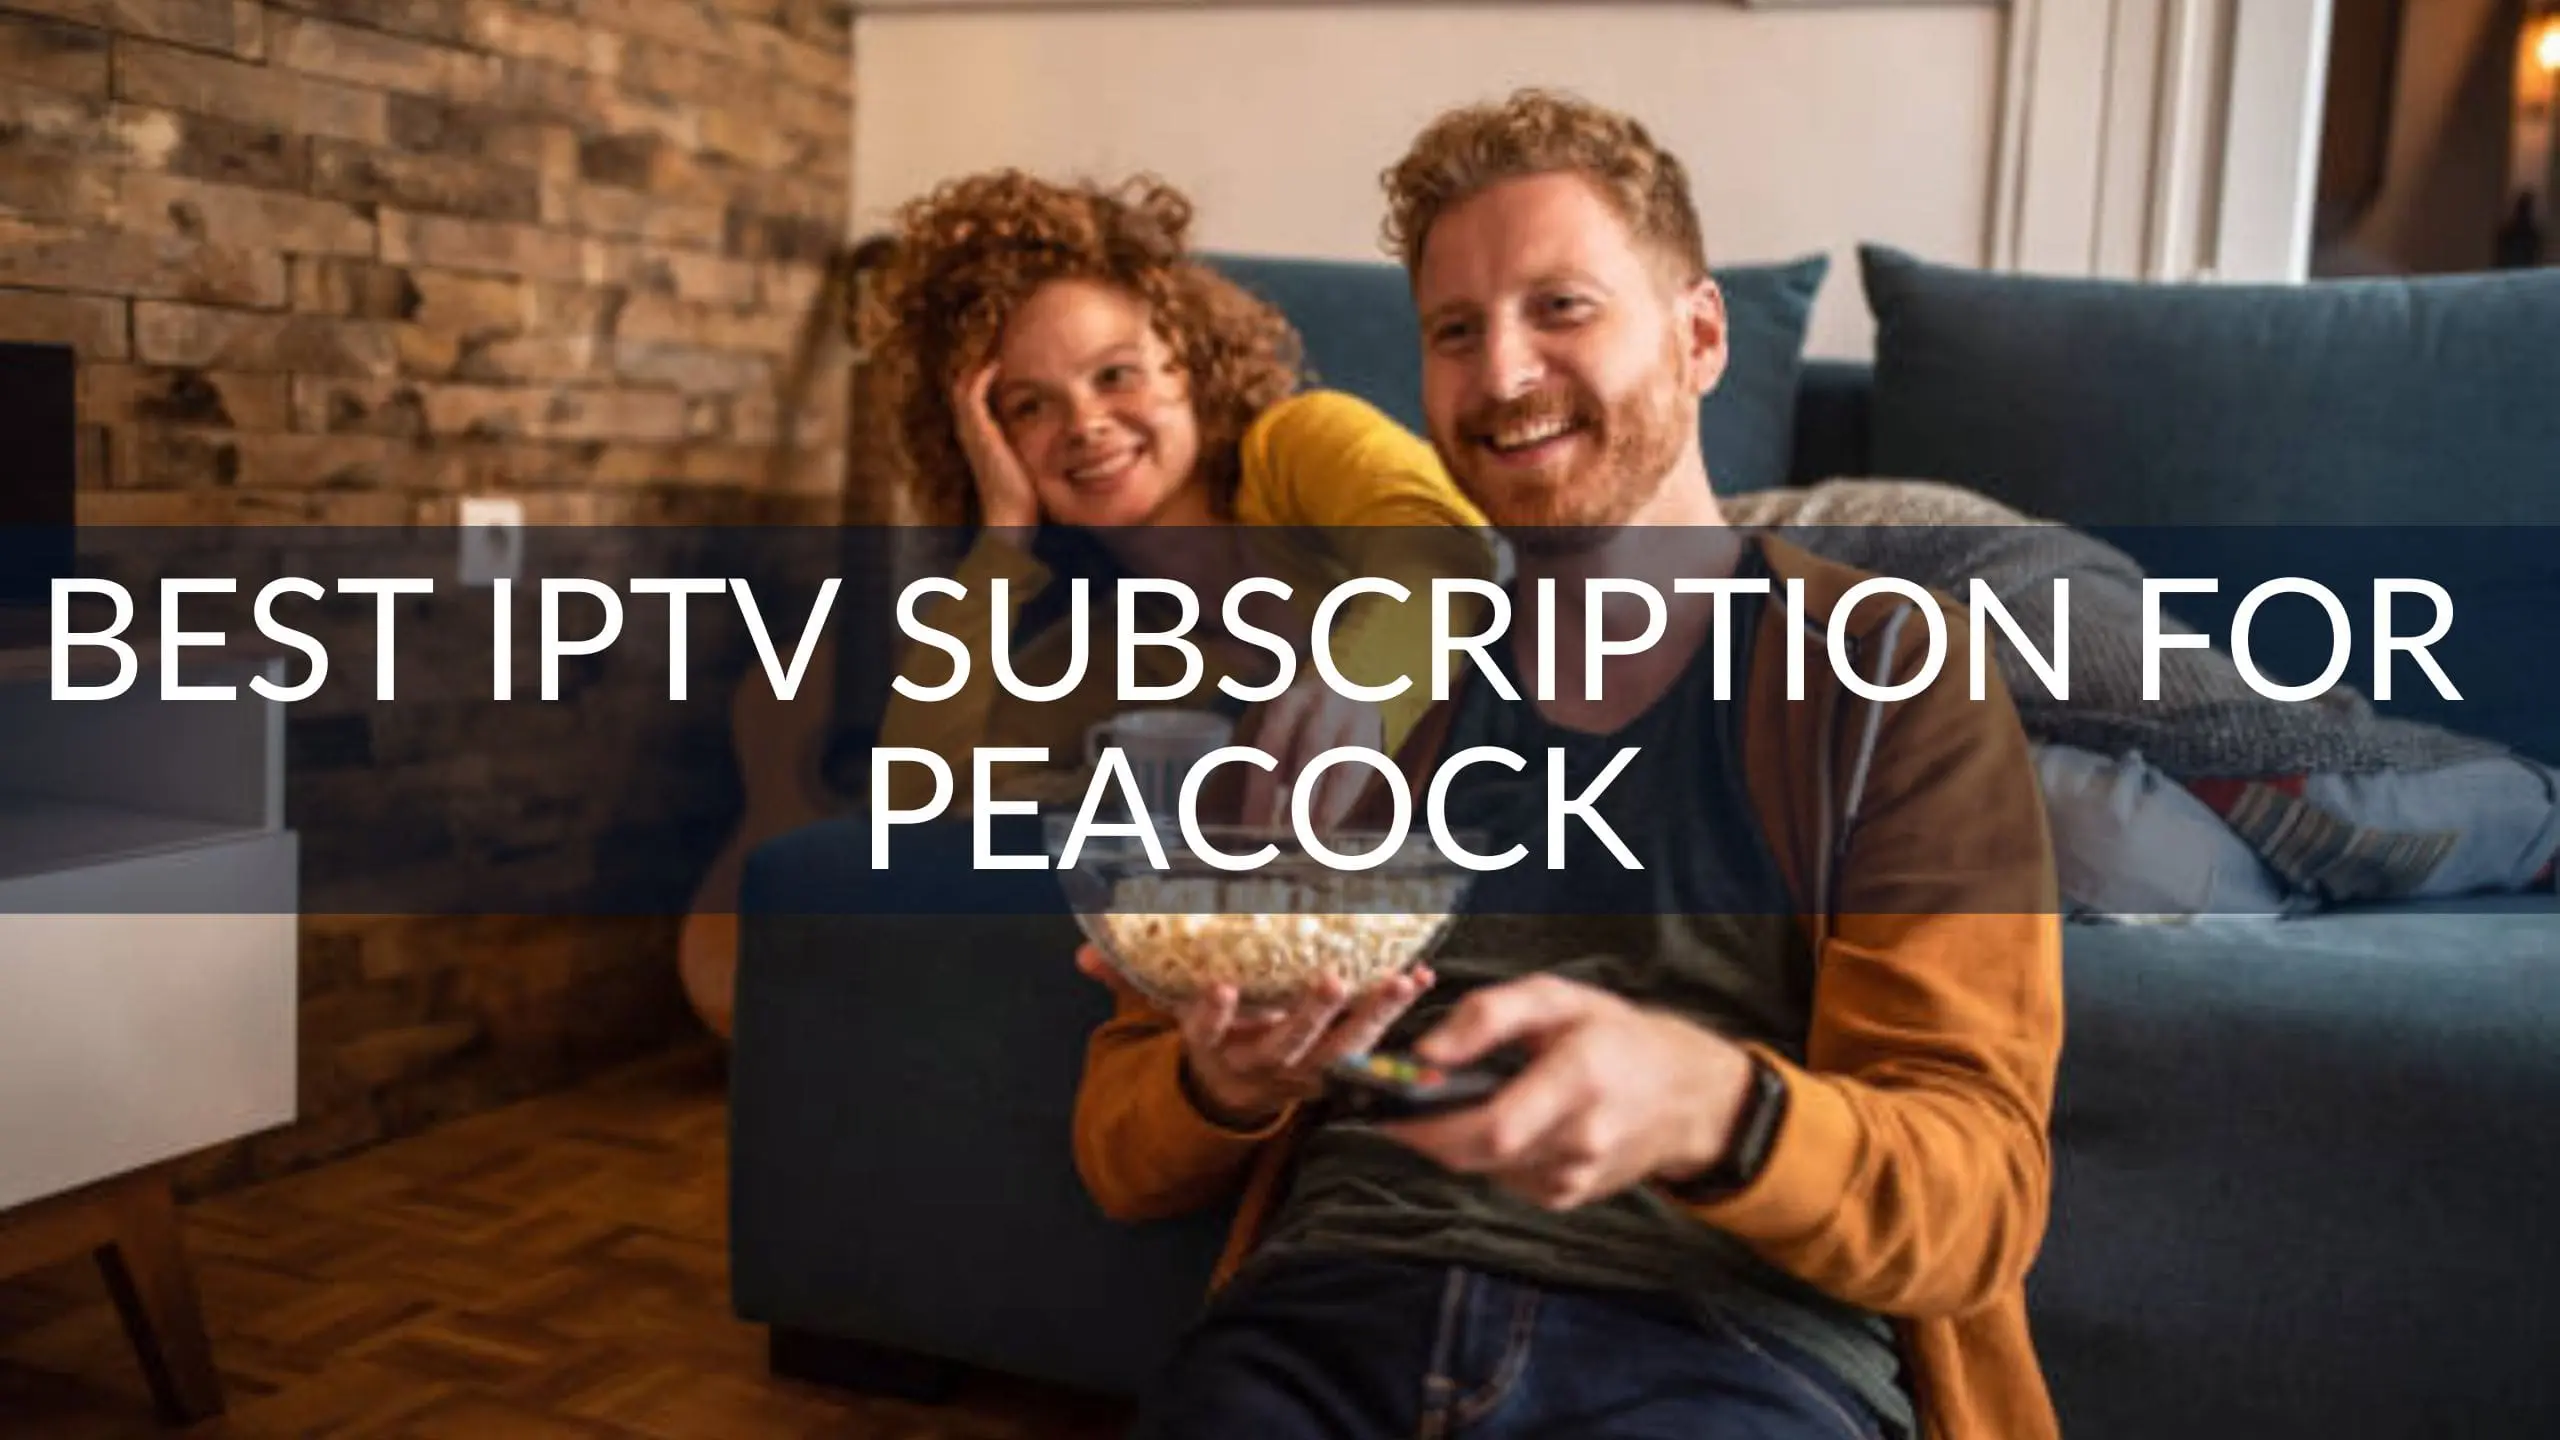 Best IPTV Subscription for Peacock